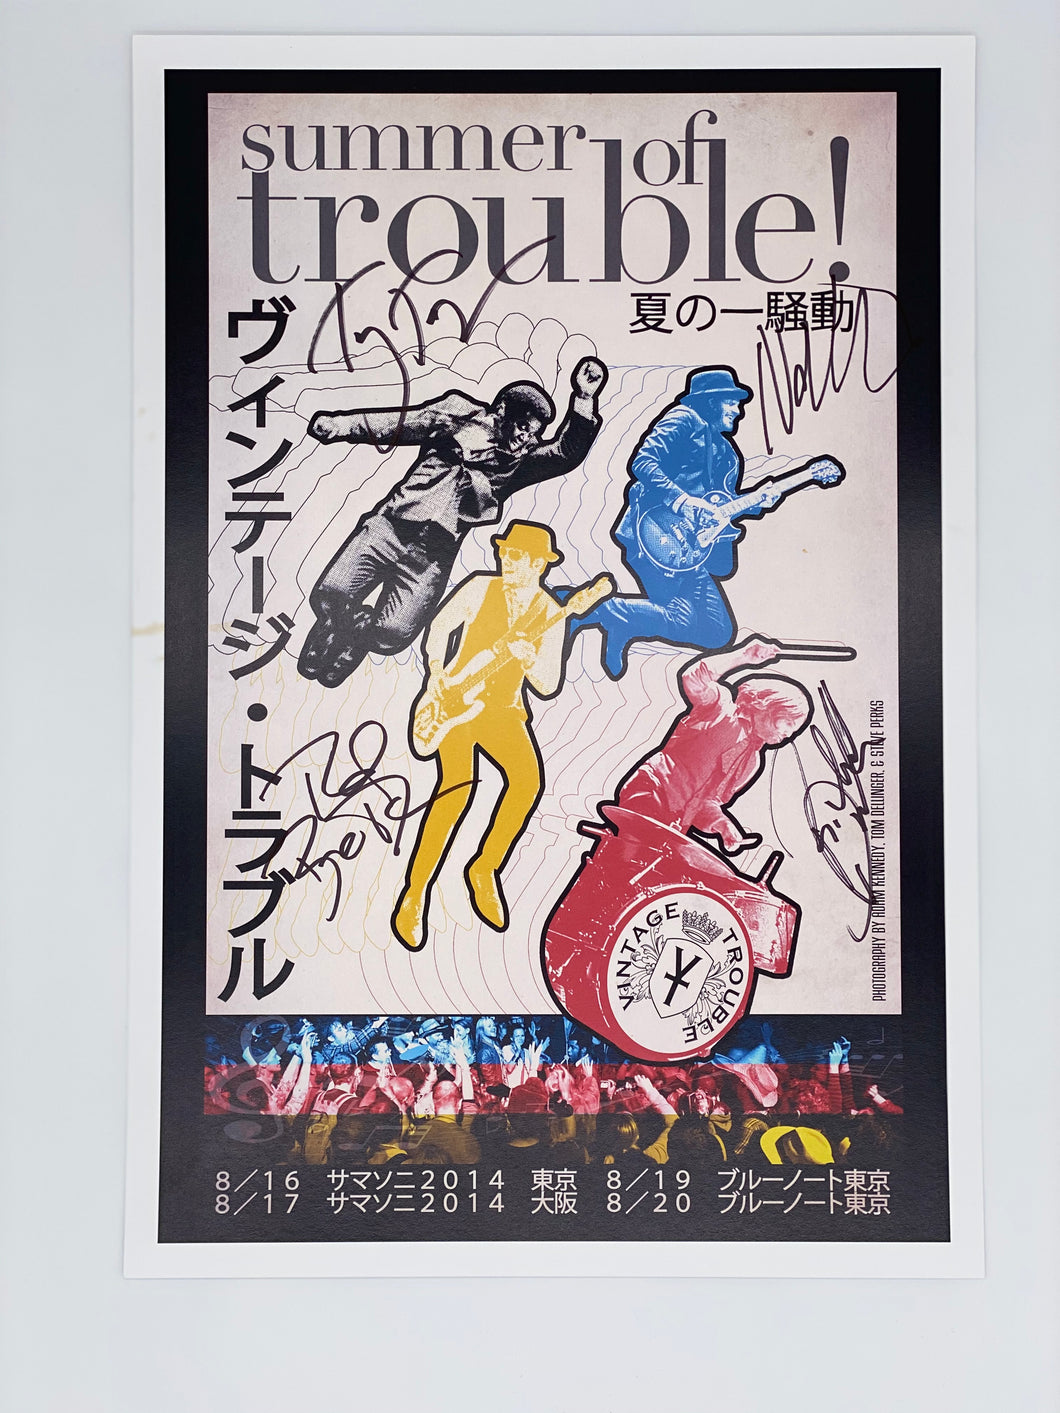 Japan Summer of Trouble 2014 Tour Poster signed by all 4 members